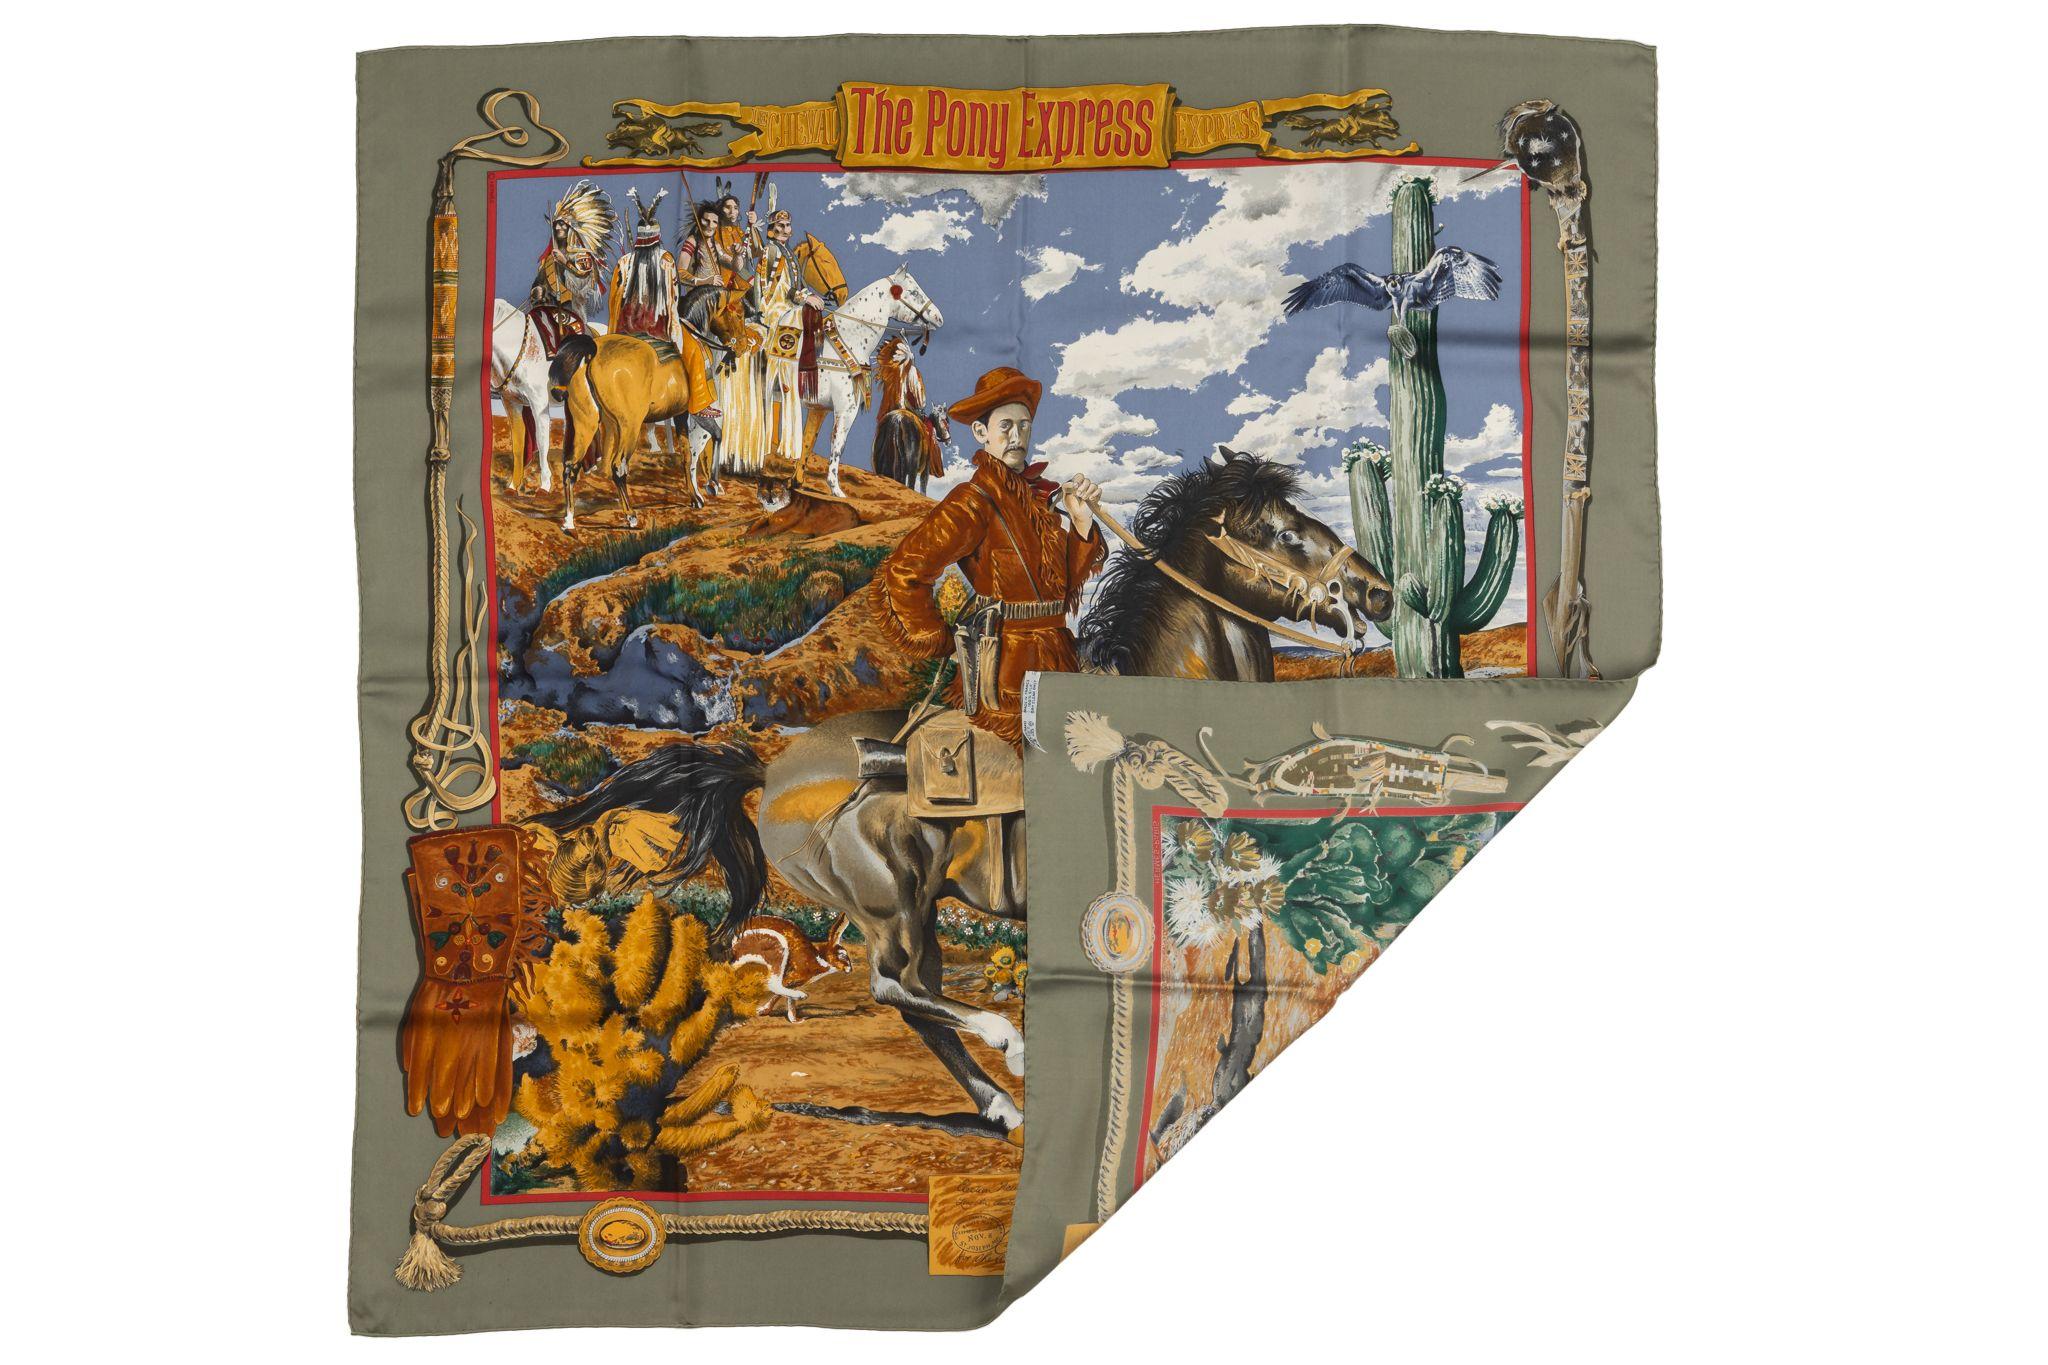 Hermès Pony Express rare olive green silk scarf by famed artist Kermit Oliver. The Pony Express features the postal system between Missouri and California during the mid 1800s. Hand-rolled edges. 
Comes with original box.